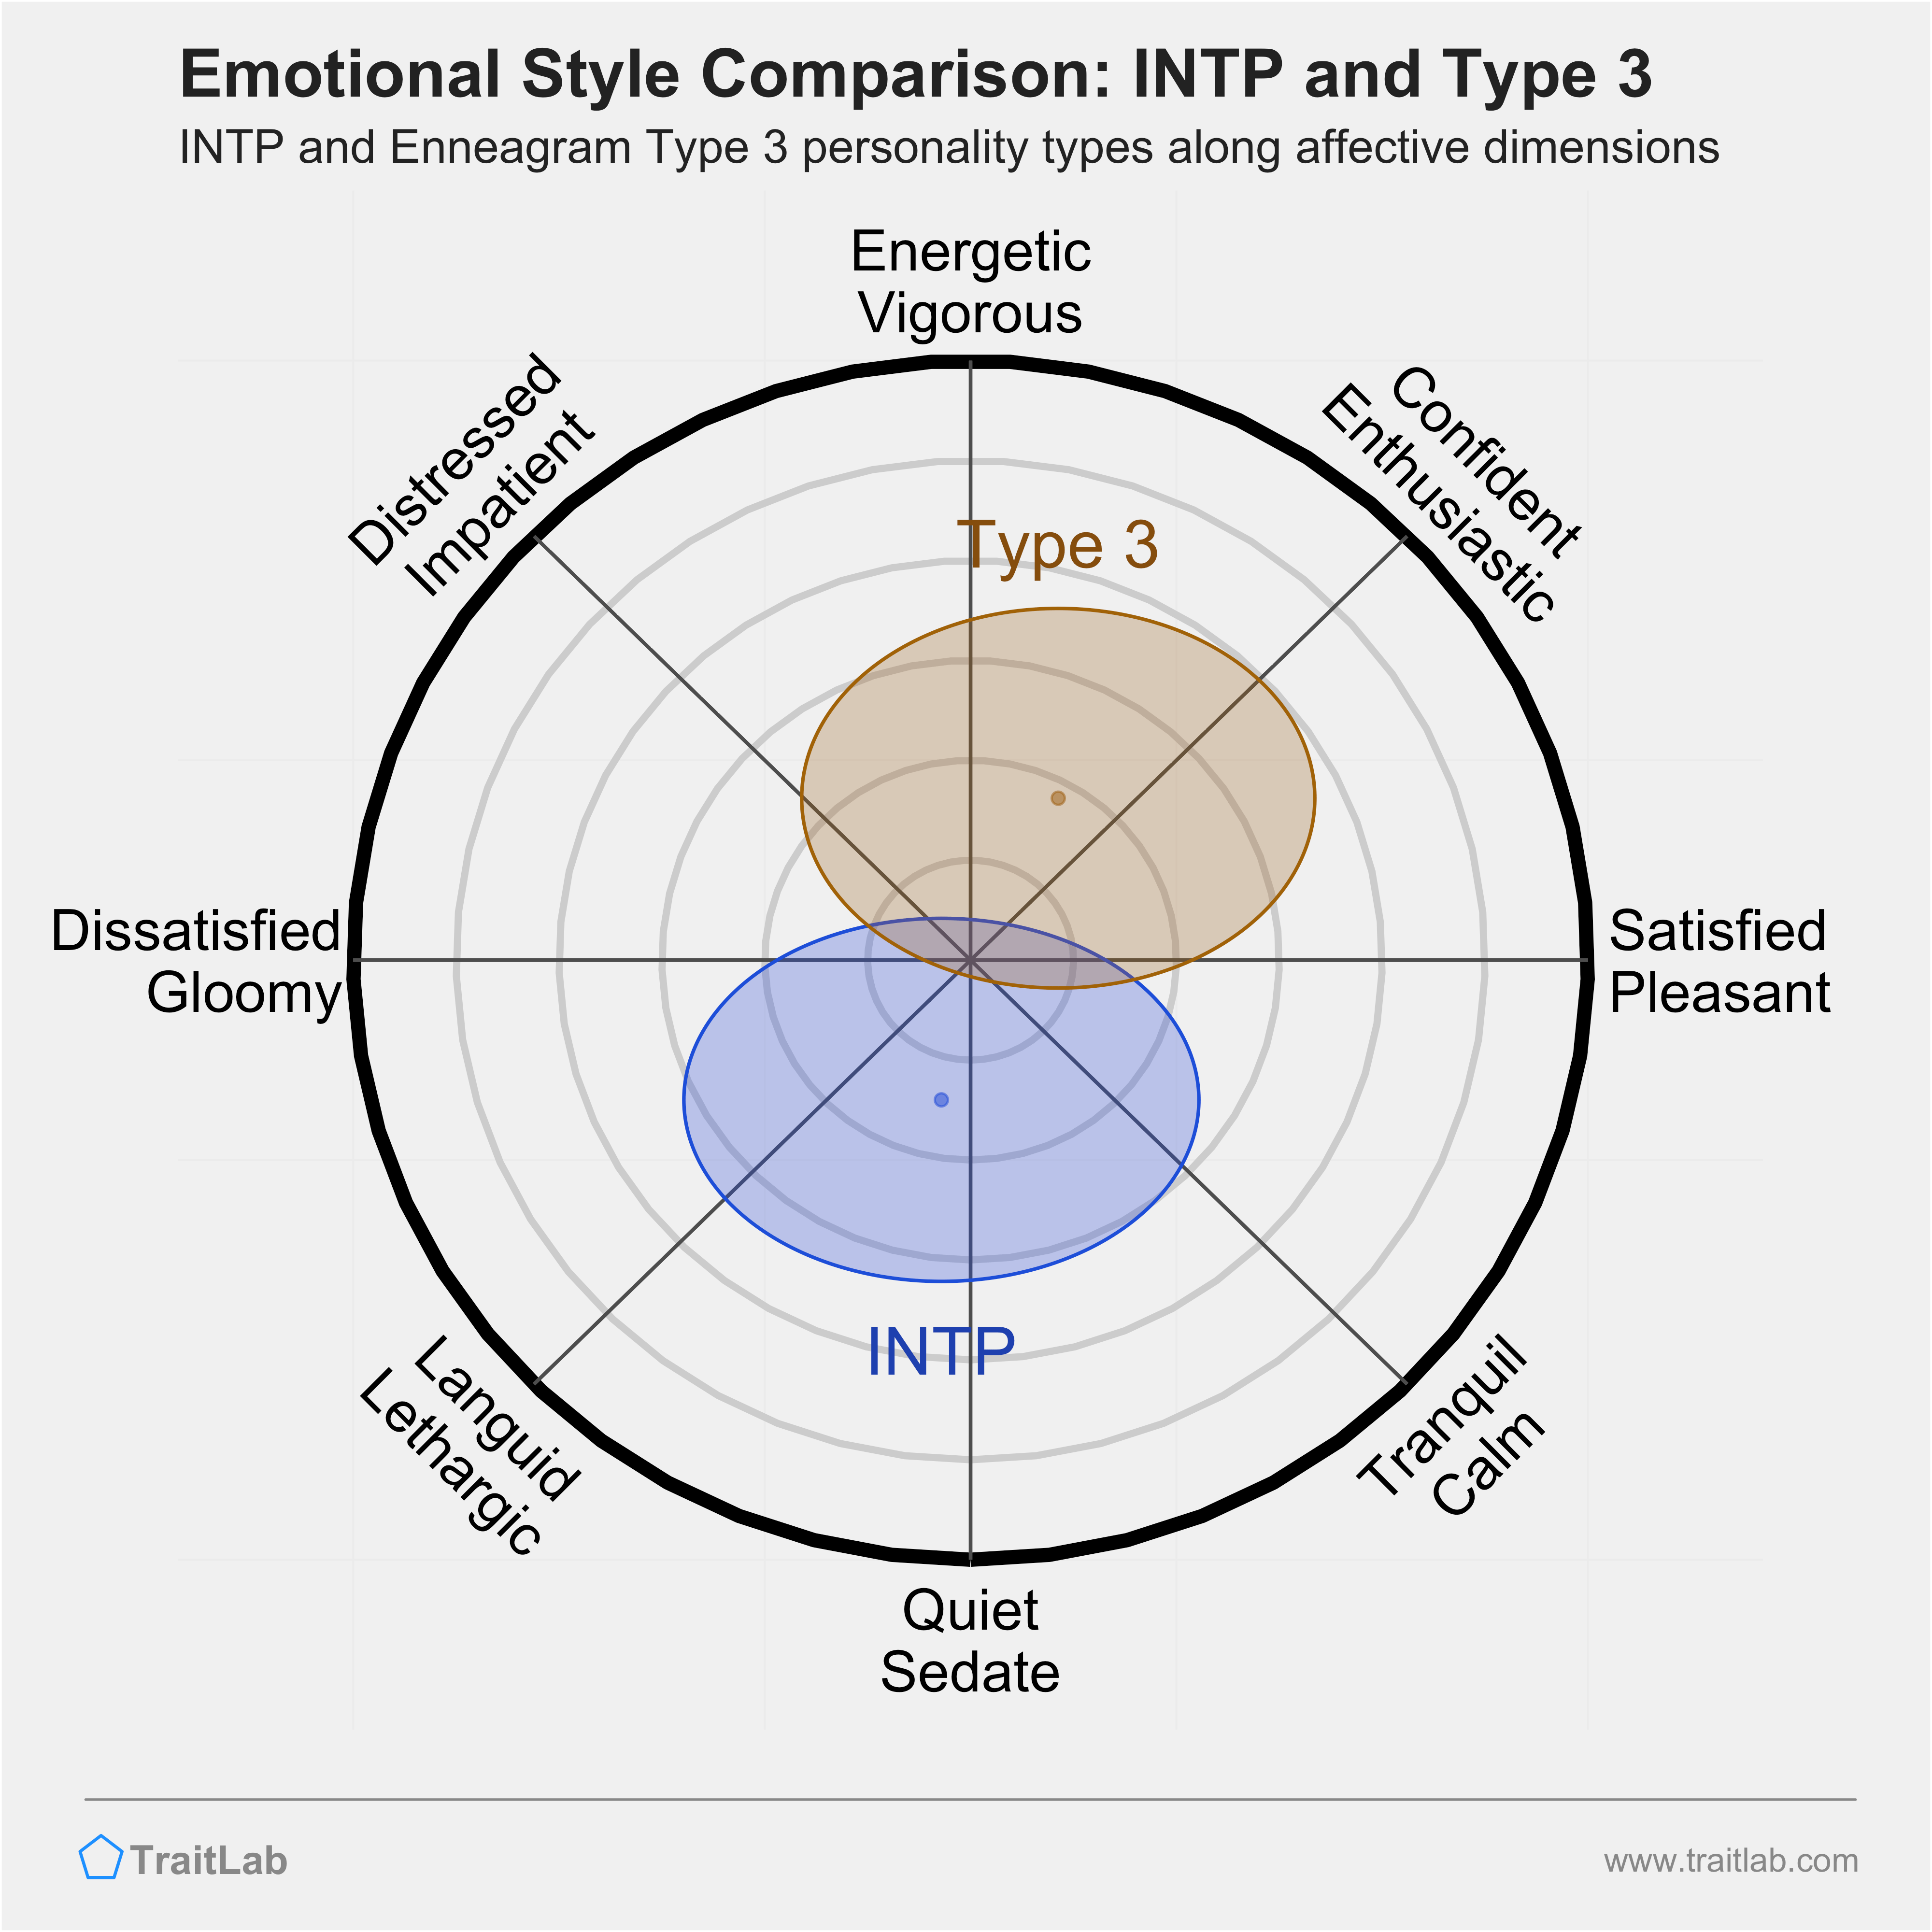 INTP and Type 3 comparison across emotional (affective) dimensions